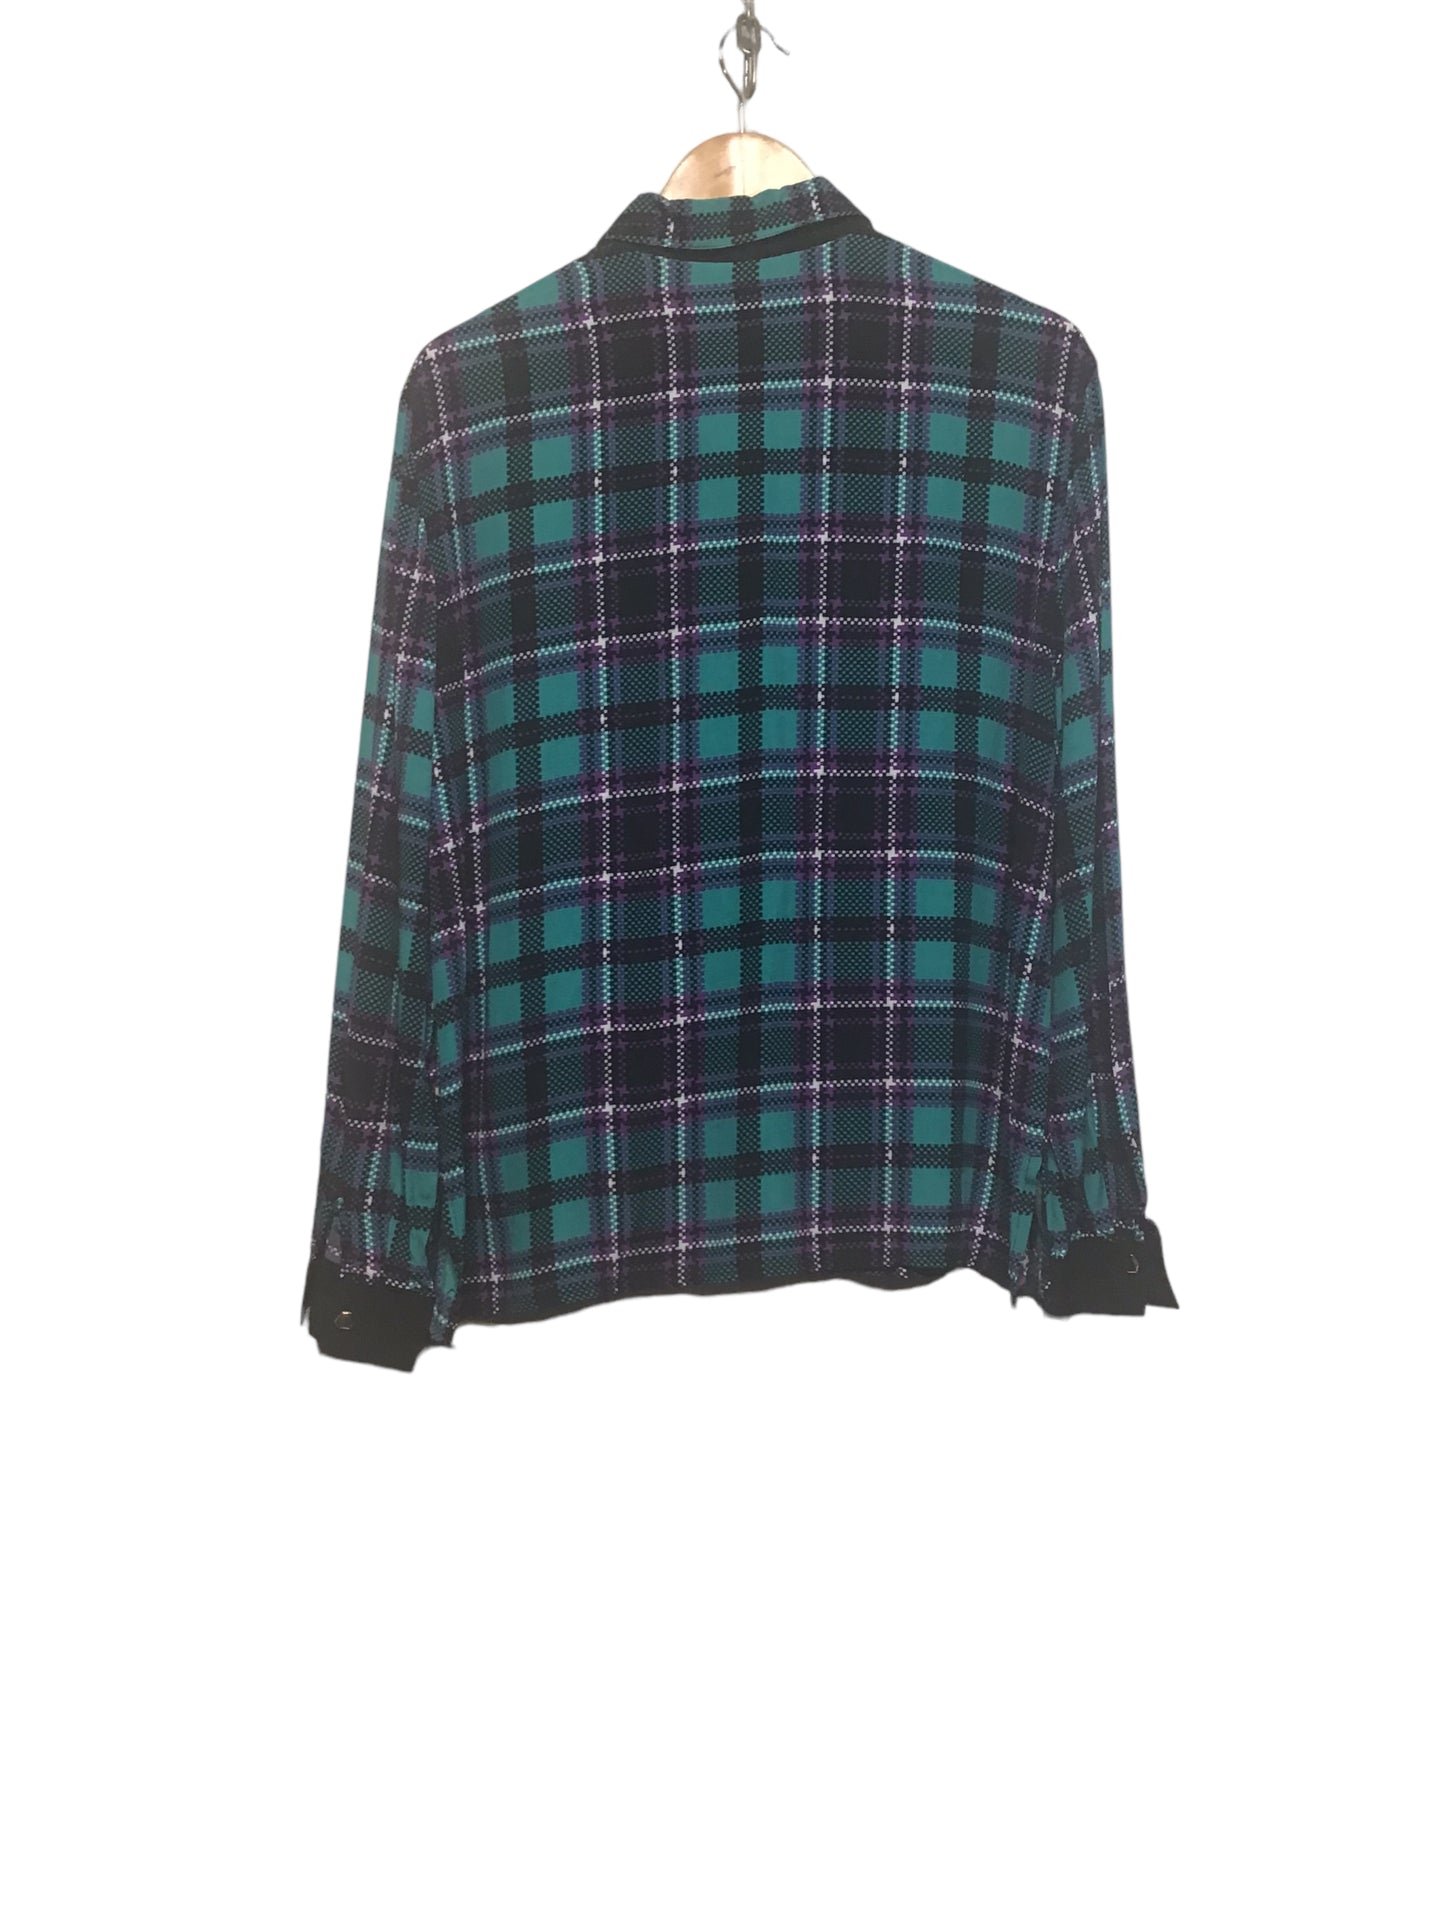 Tartan Design Blouse with Gold Buttons (Size L)